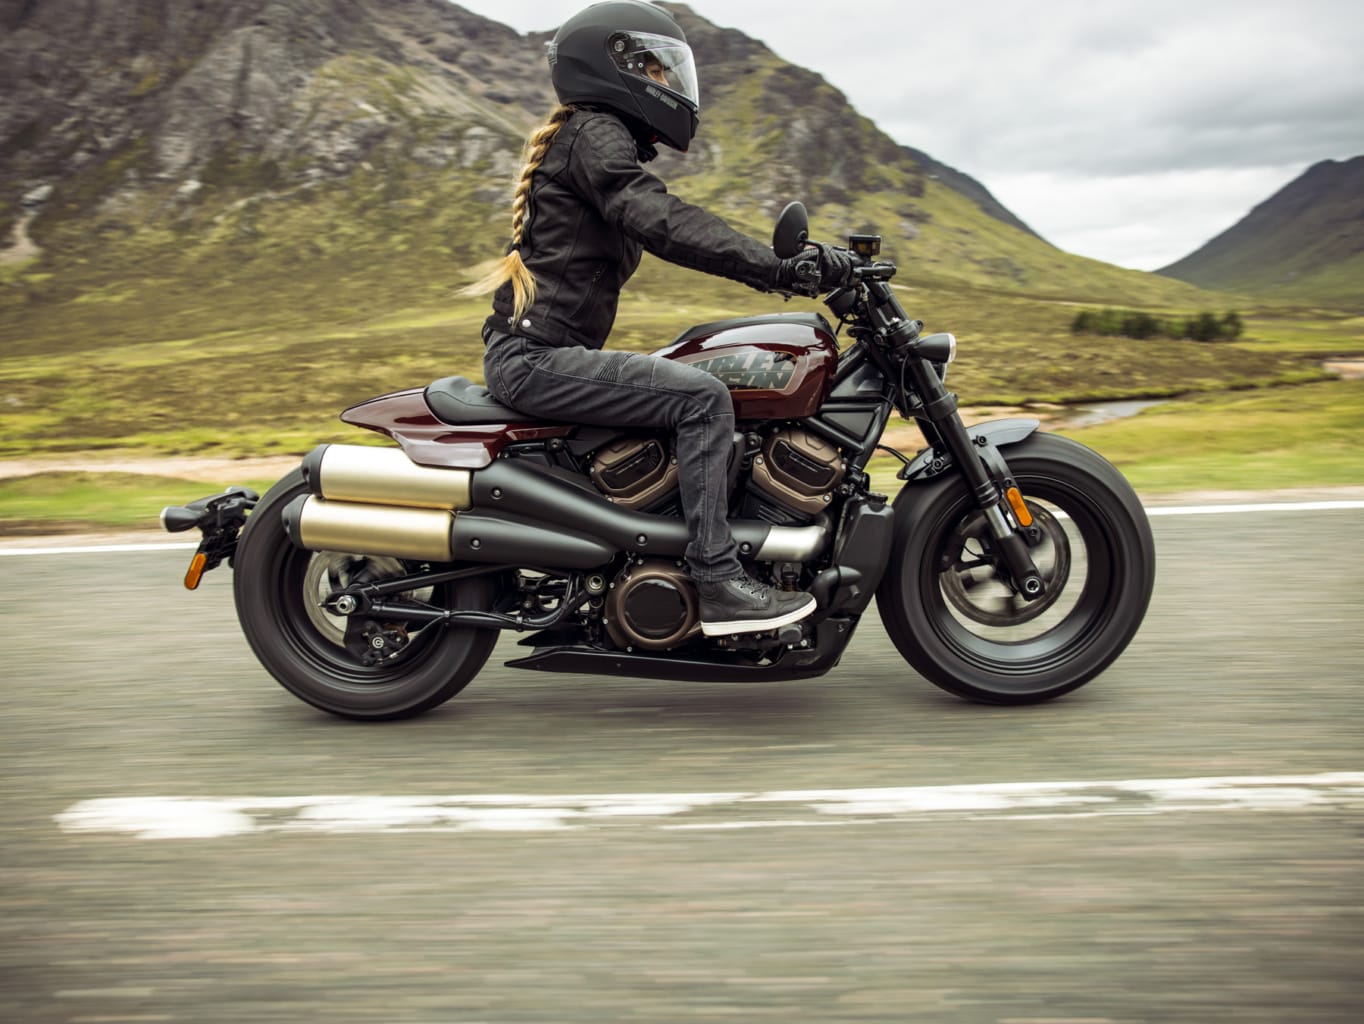 2021 HarleyDavidson Sportster S Review 14 Fast Facts